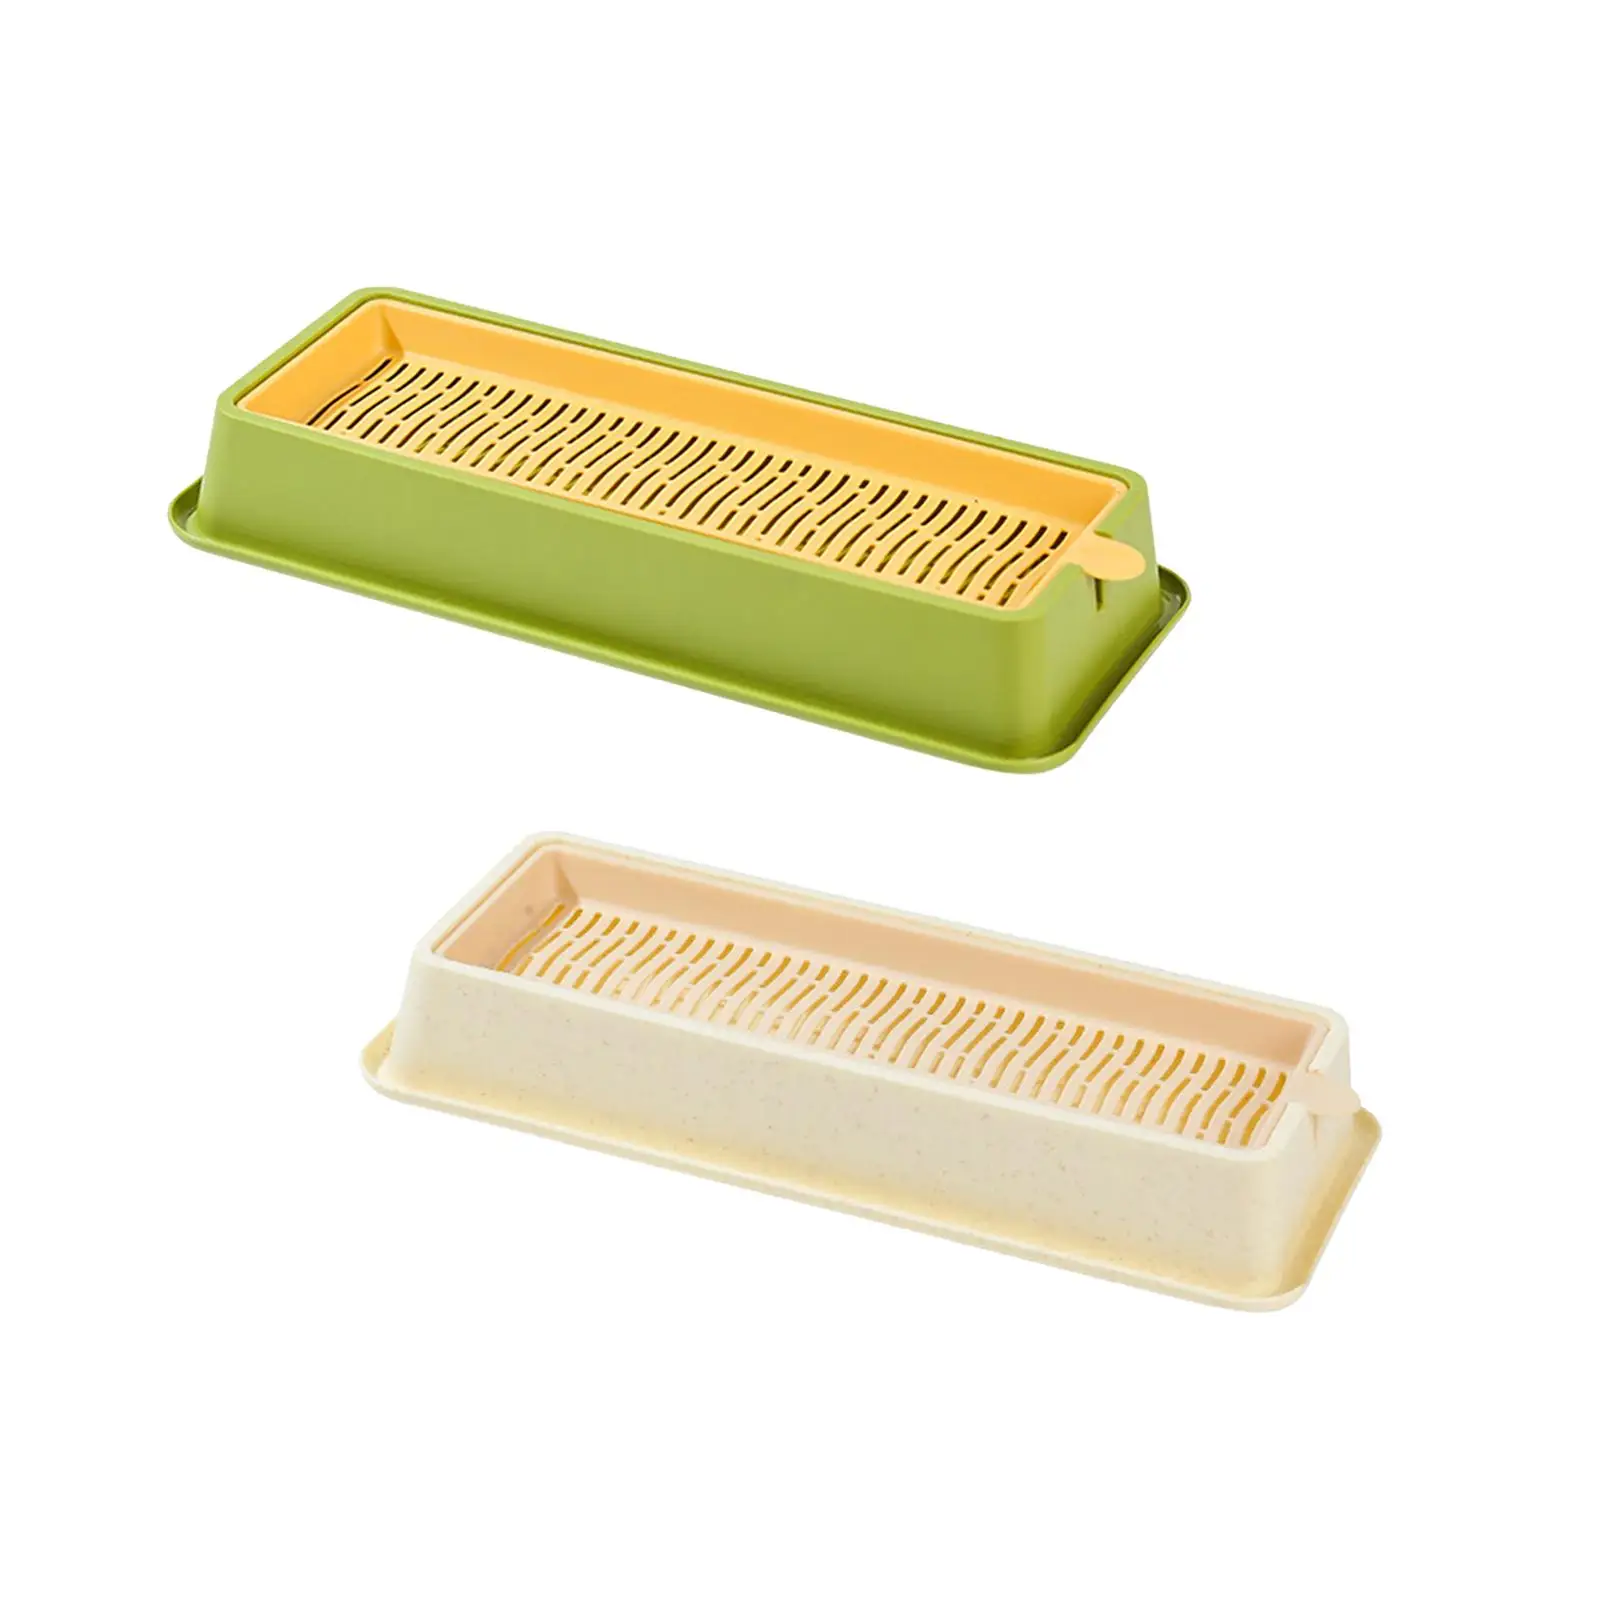 Seed Sprouter Tray Cat Grass Box for Garden Seedling Planting Microgreens